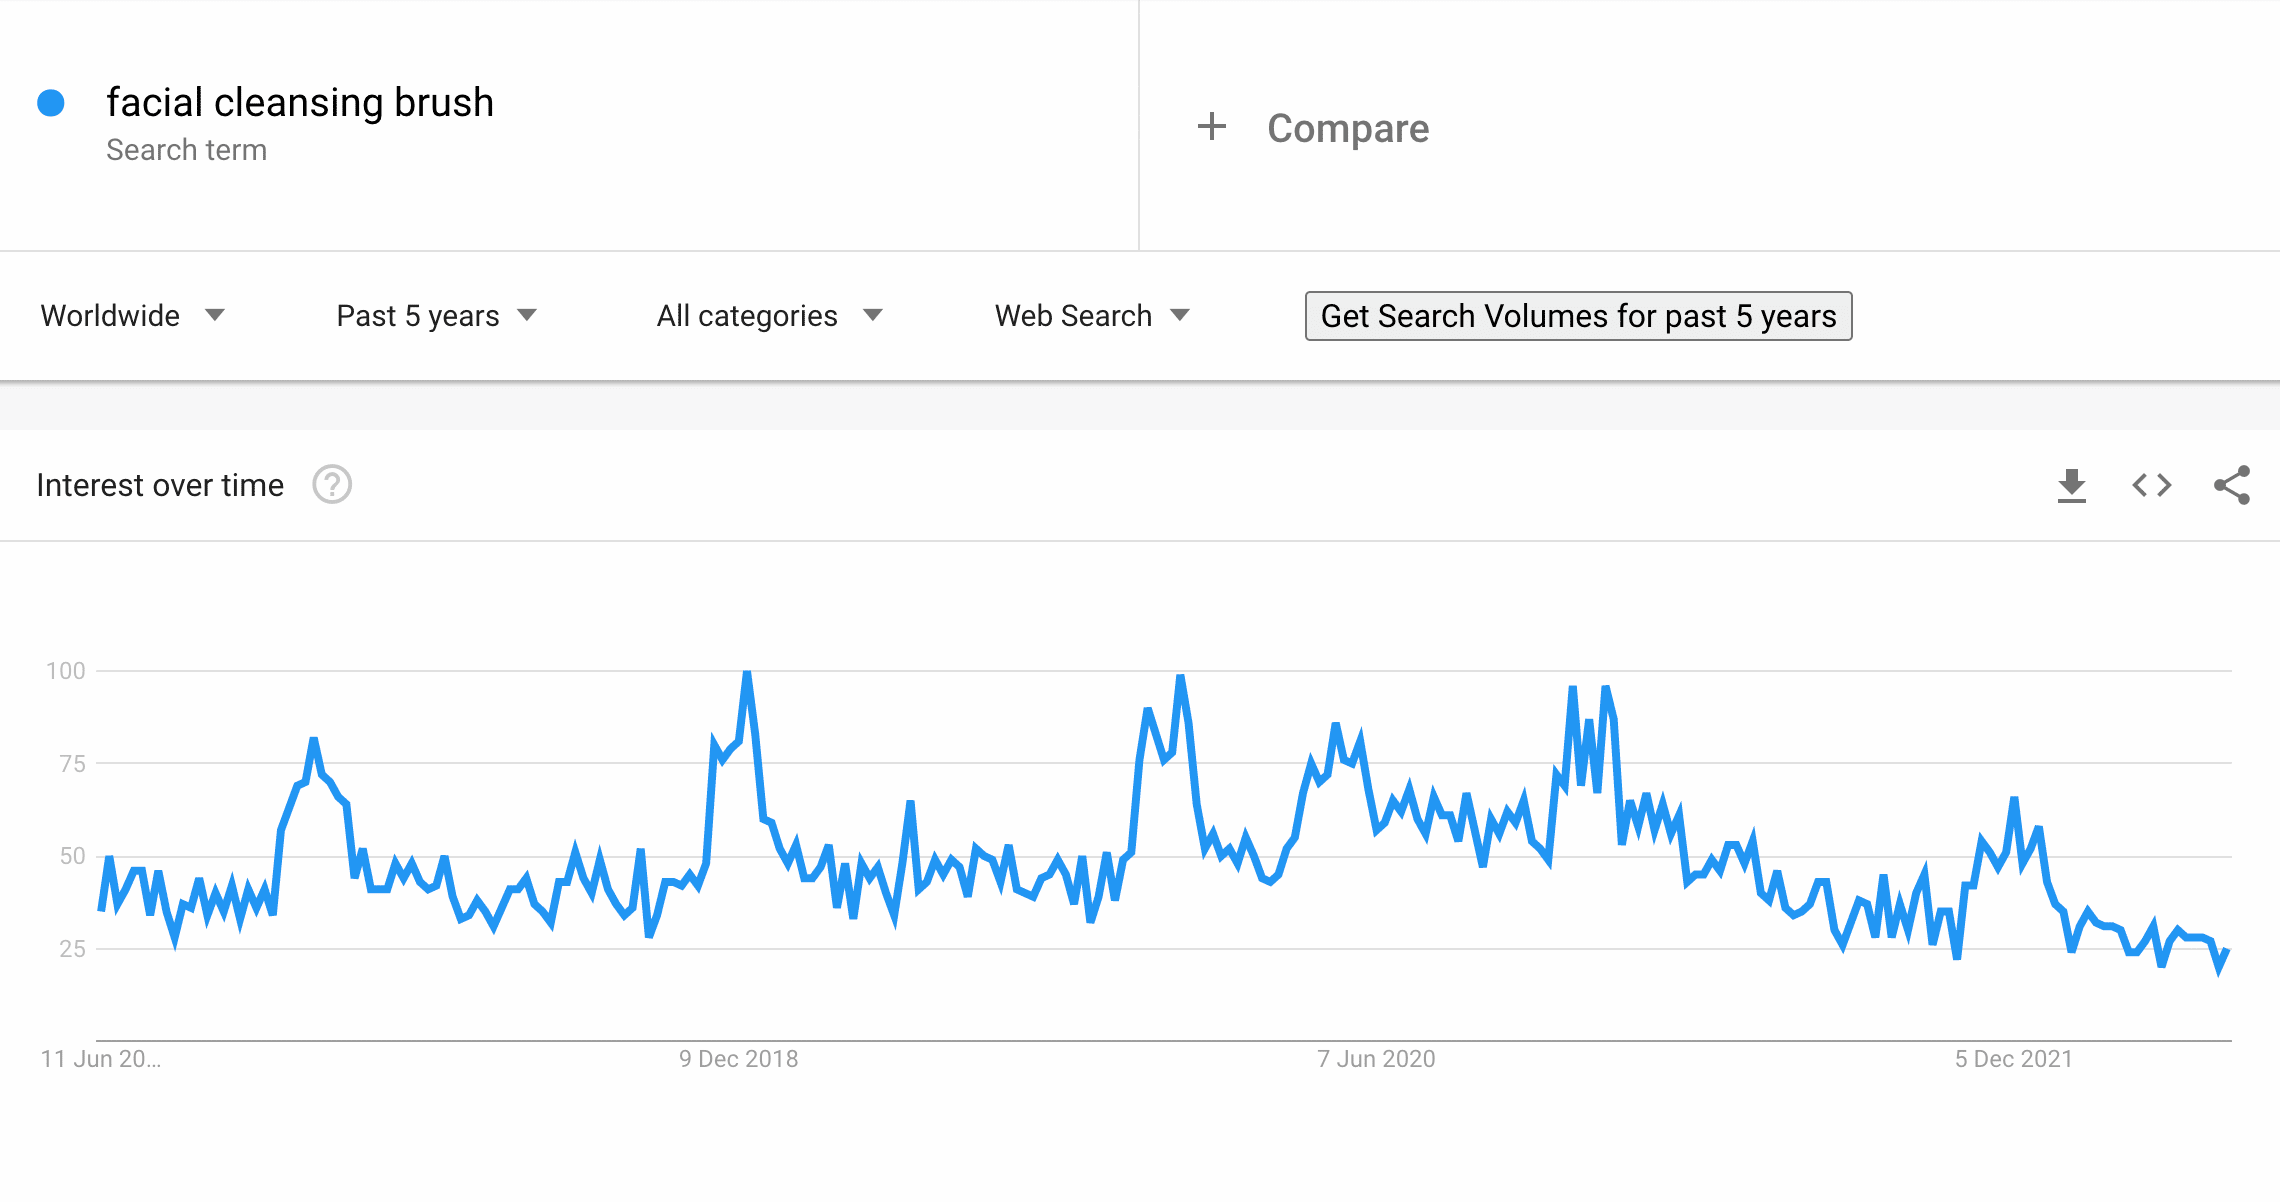 Facial cleansing brush on Google Trends